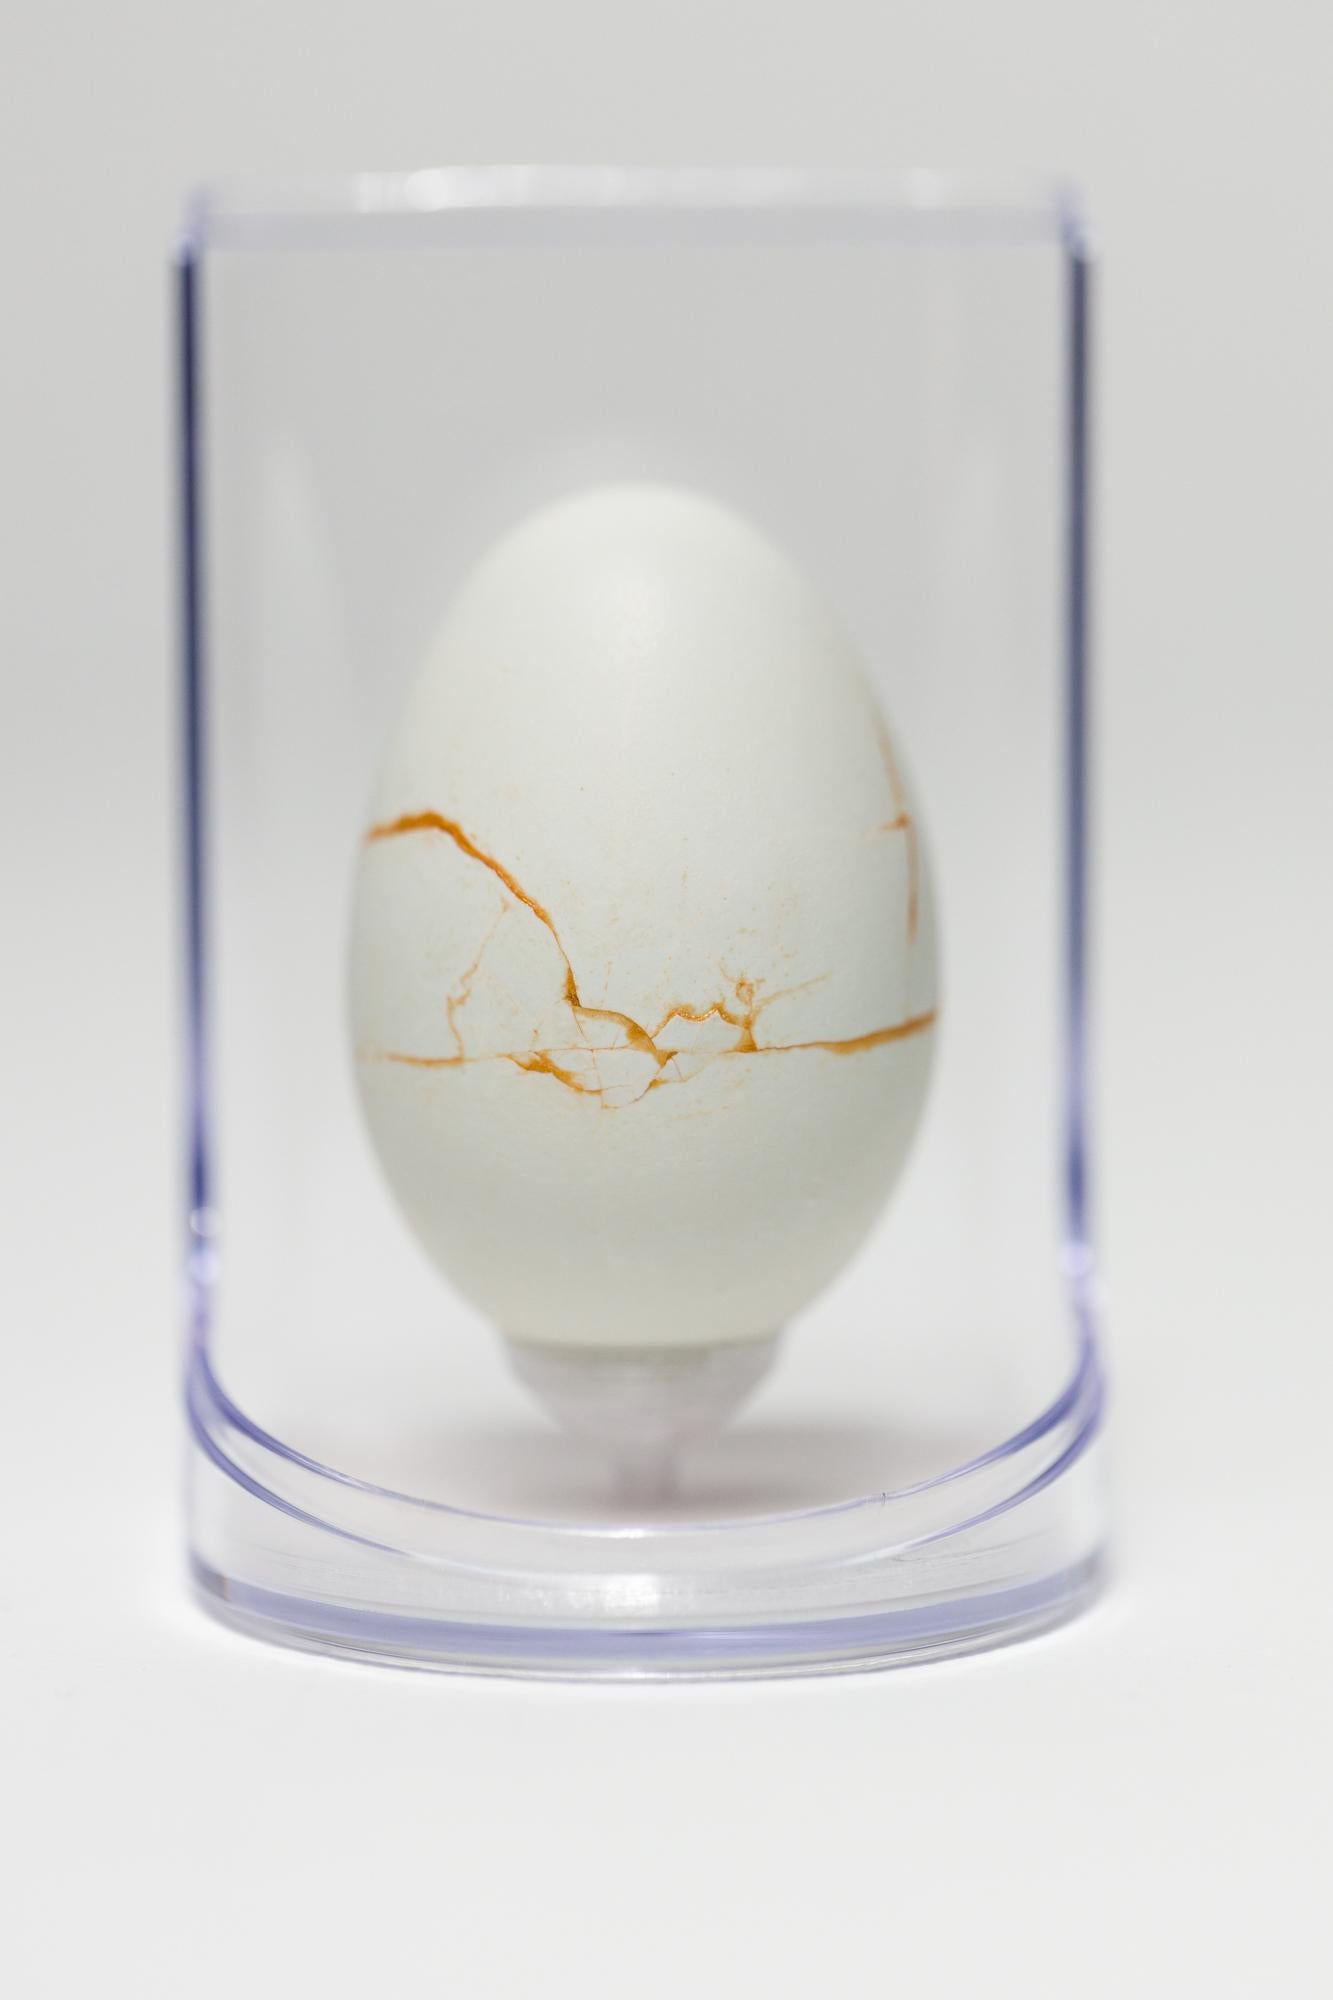 "Day in the Life: Green #29", Found Object Sculpture, Egg Motif - Mixed Media Art by Katie VanVliet